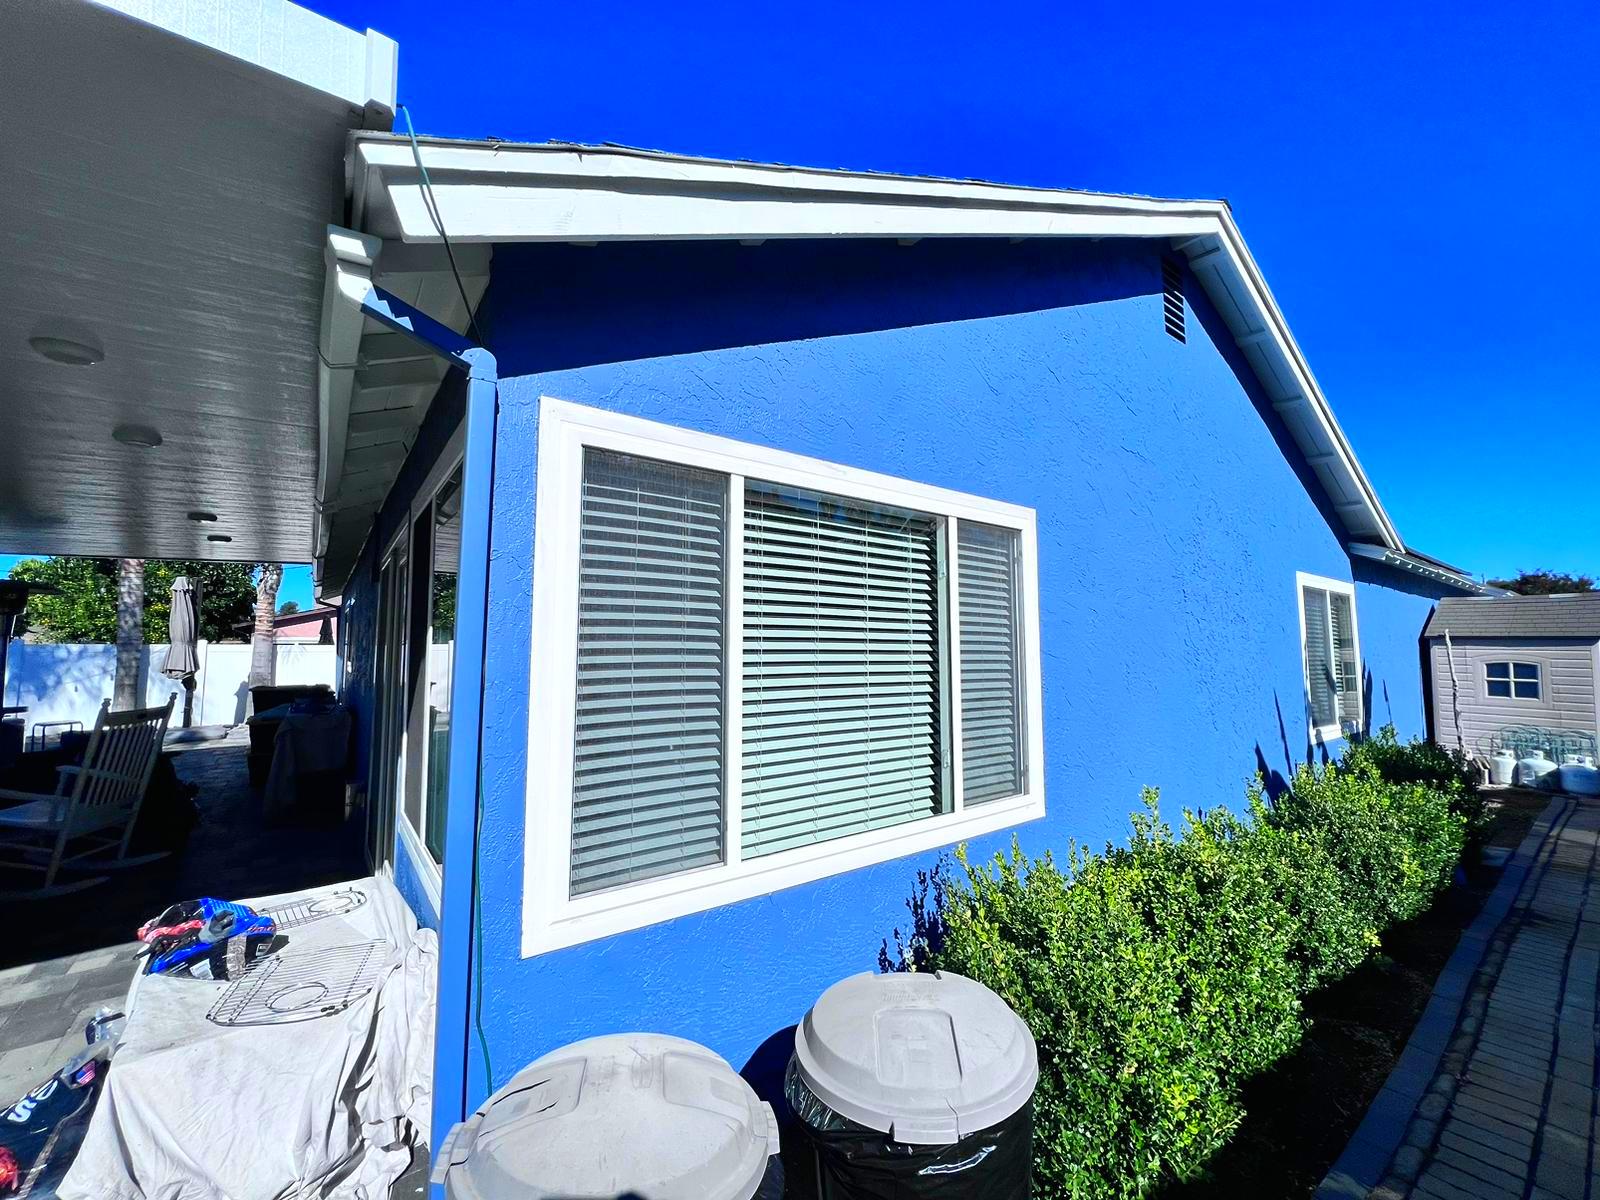 CoolWall Coating Application in Spring Valley, CA 91978